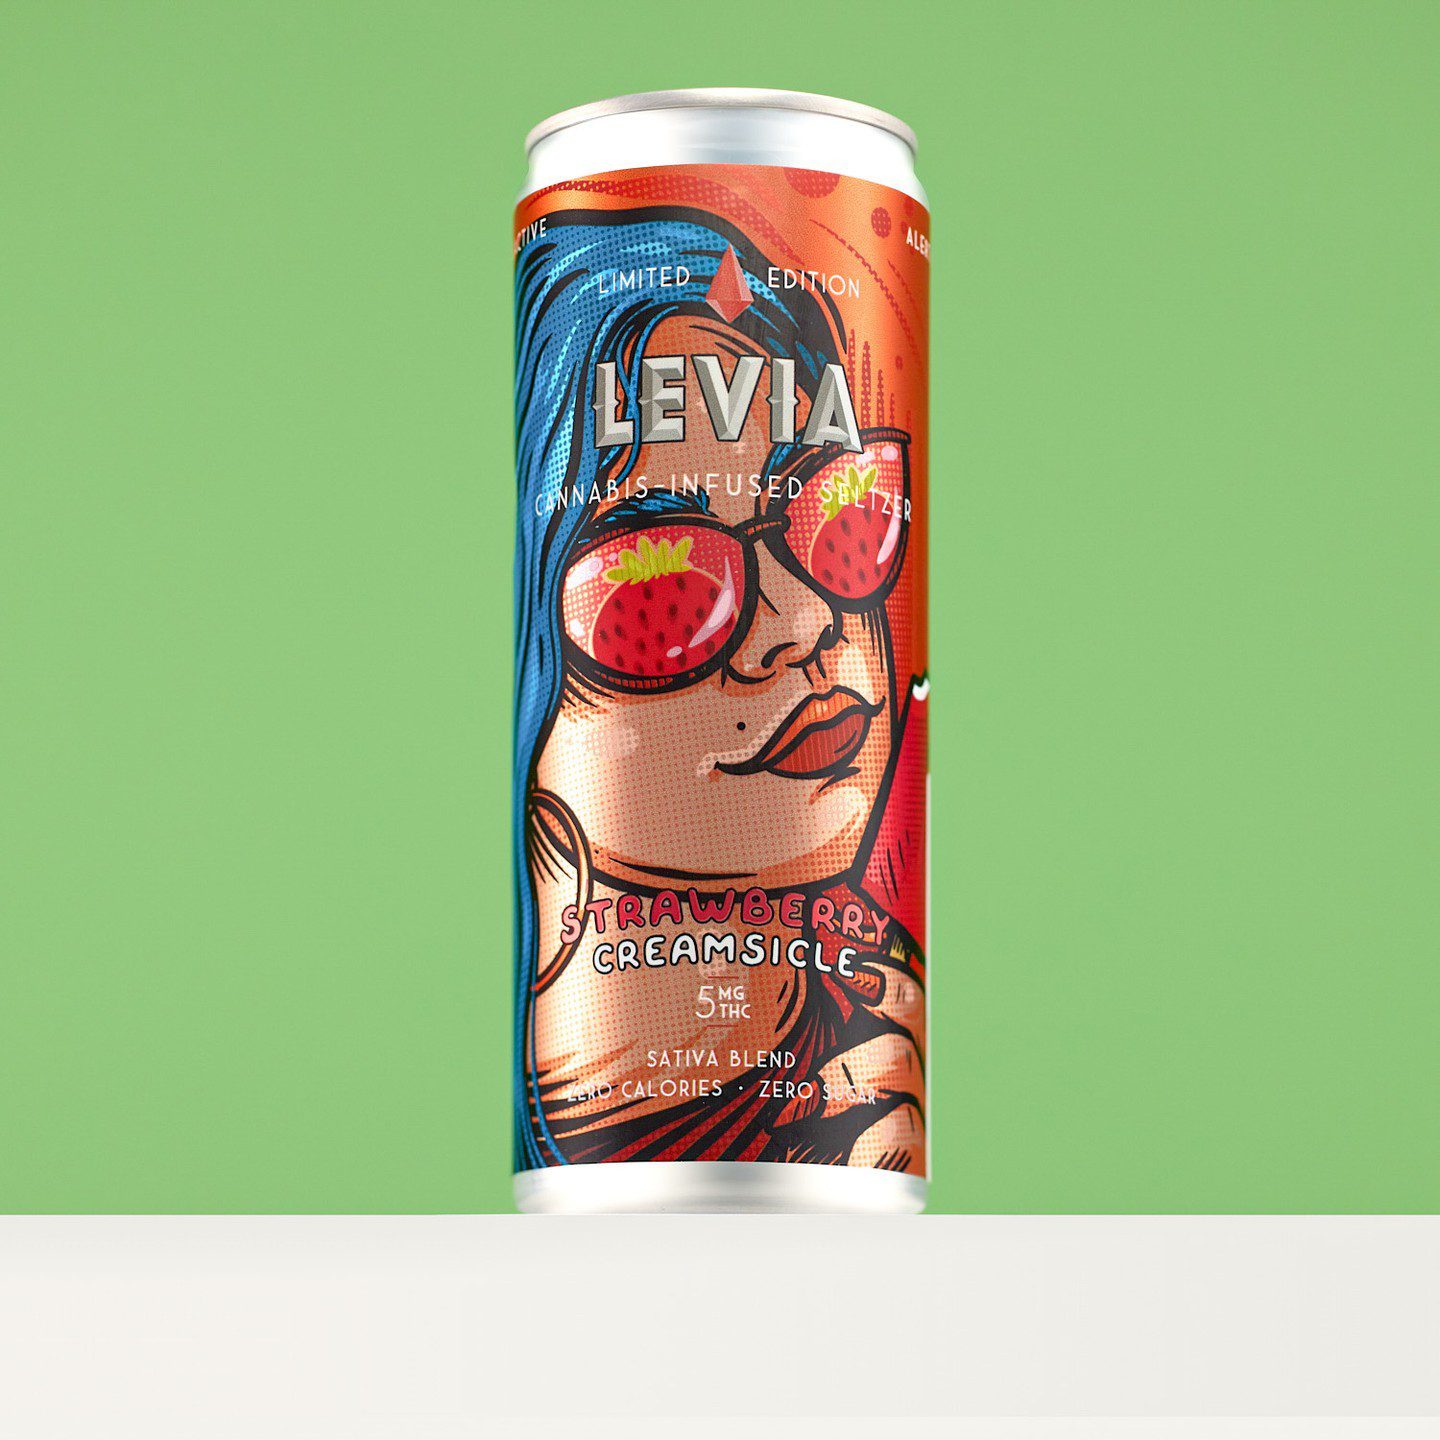 Meet the newest LEVIA limited-edition flavor: Strawberry Creamsicle! Hitting shelves throughout Massachusetts later this week, the limited-edition Strawberry Creamsicle offering mimics the desired effects of our OG “Achieve” seltzer – consisting of a sativa cannabis blend that gives you energy for work or play – with an innovative, fruity flavor. The amazing can artwork was done by none other than @keever. Recipe by our very own @nalani_salami91. We can't wait for you to try.: @craigcapellophotography